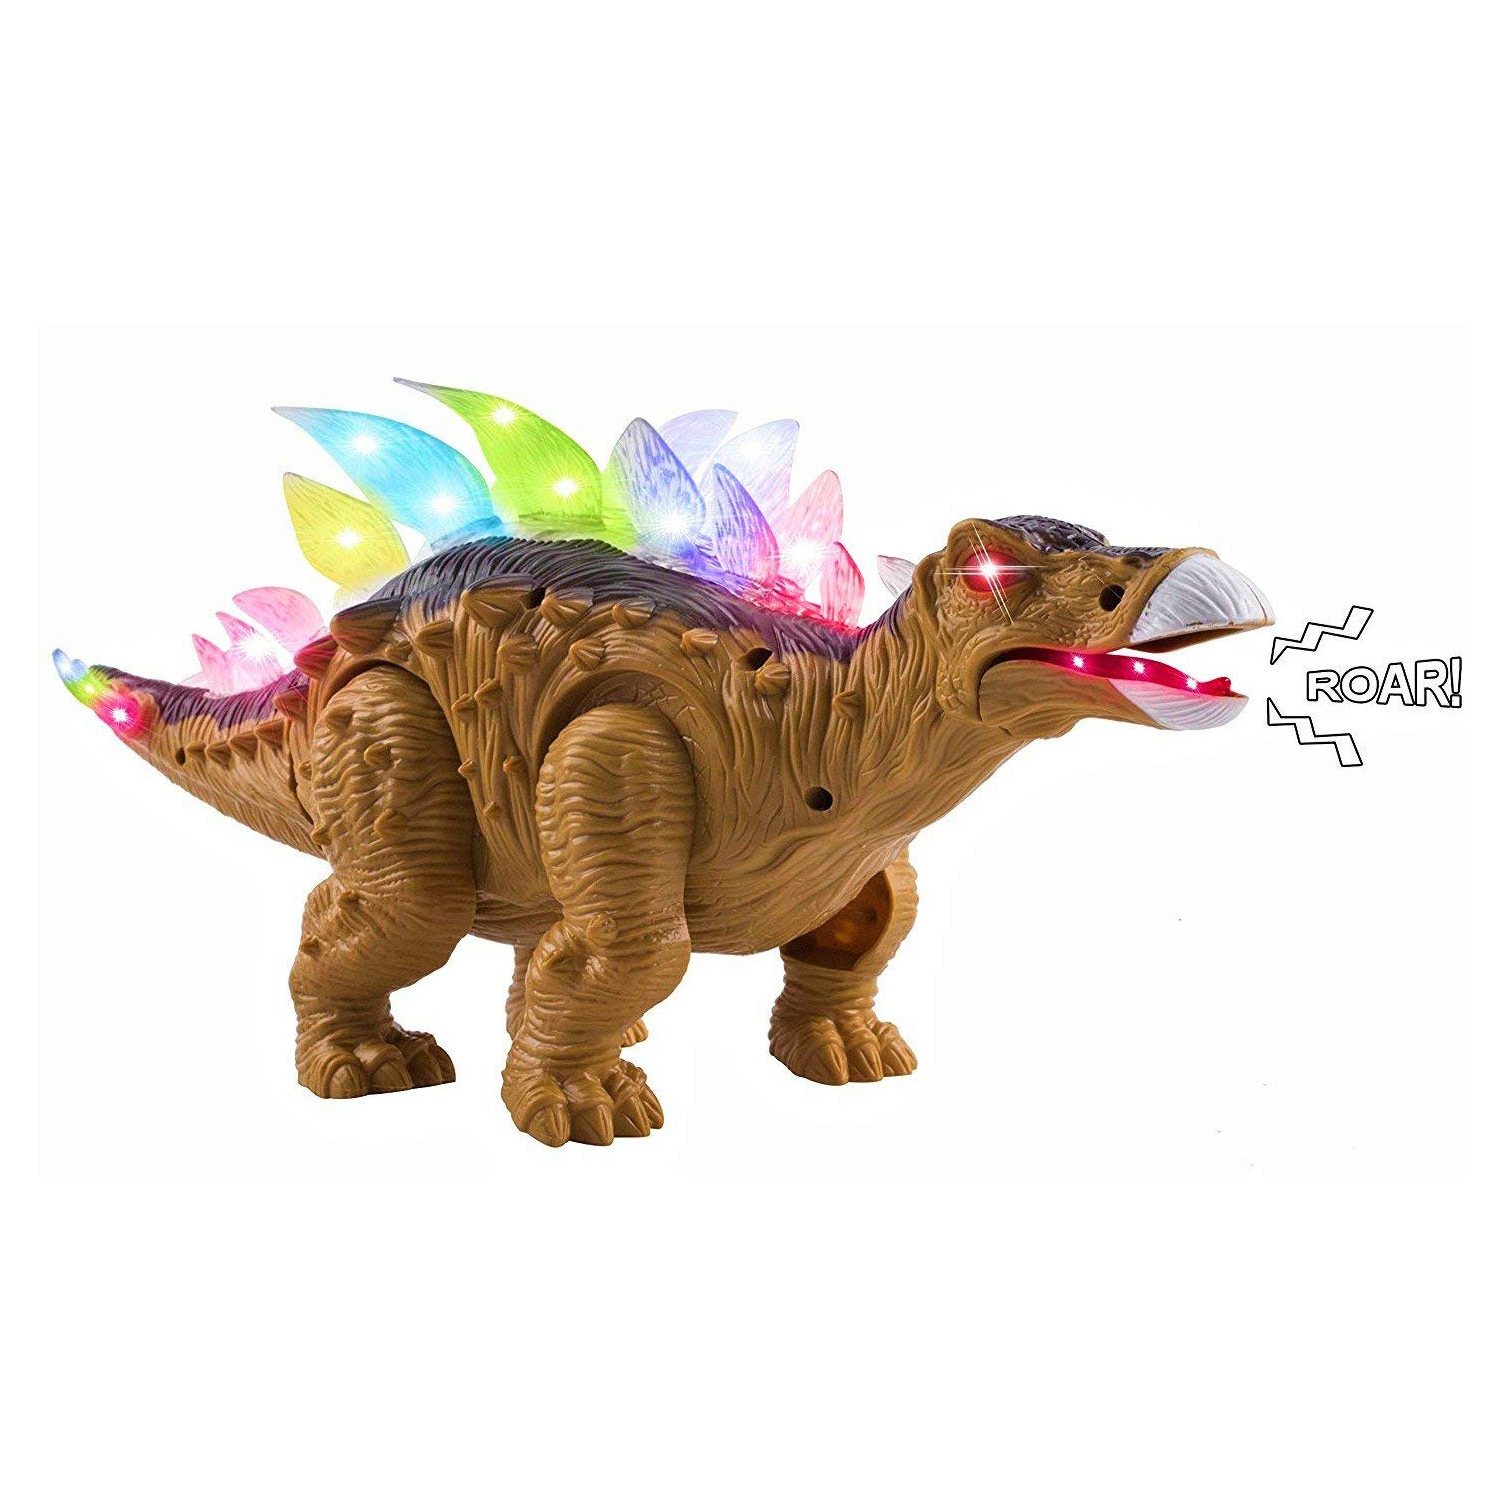 Toy Dinosaur Stegosaurus Moveable Battery Operated Walking Large 14.5" Length Figure With LED Lights And Sounds Real Movement Safari Perfect Size And Quality For Kids To Play With (Brown Color)